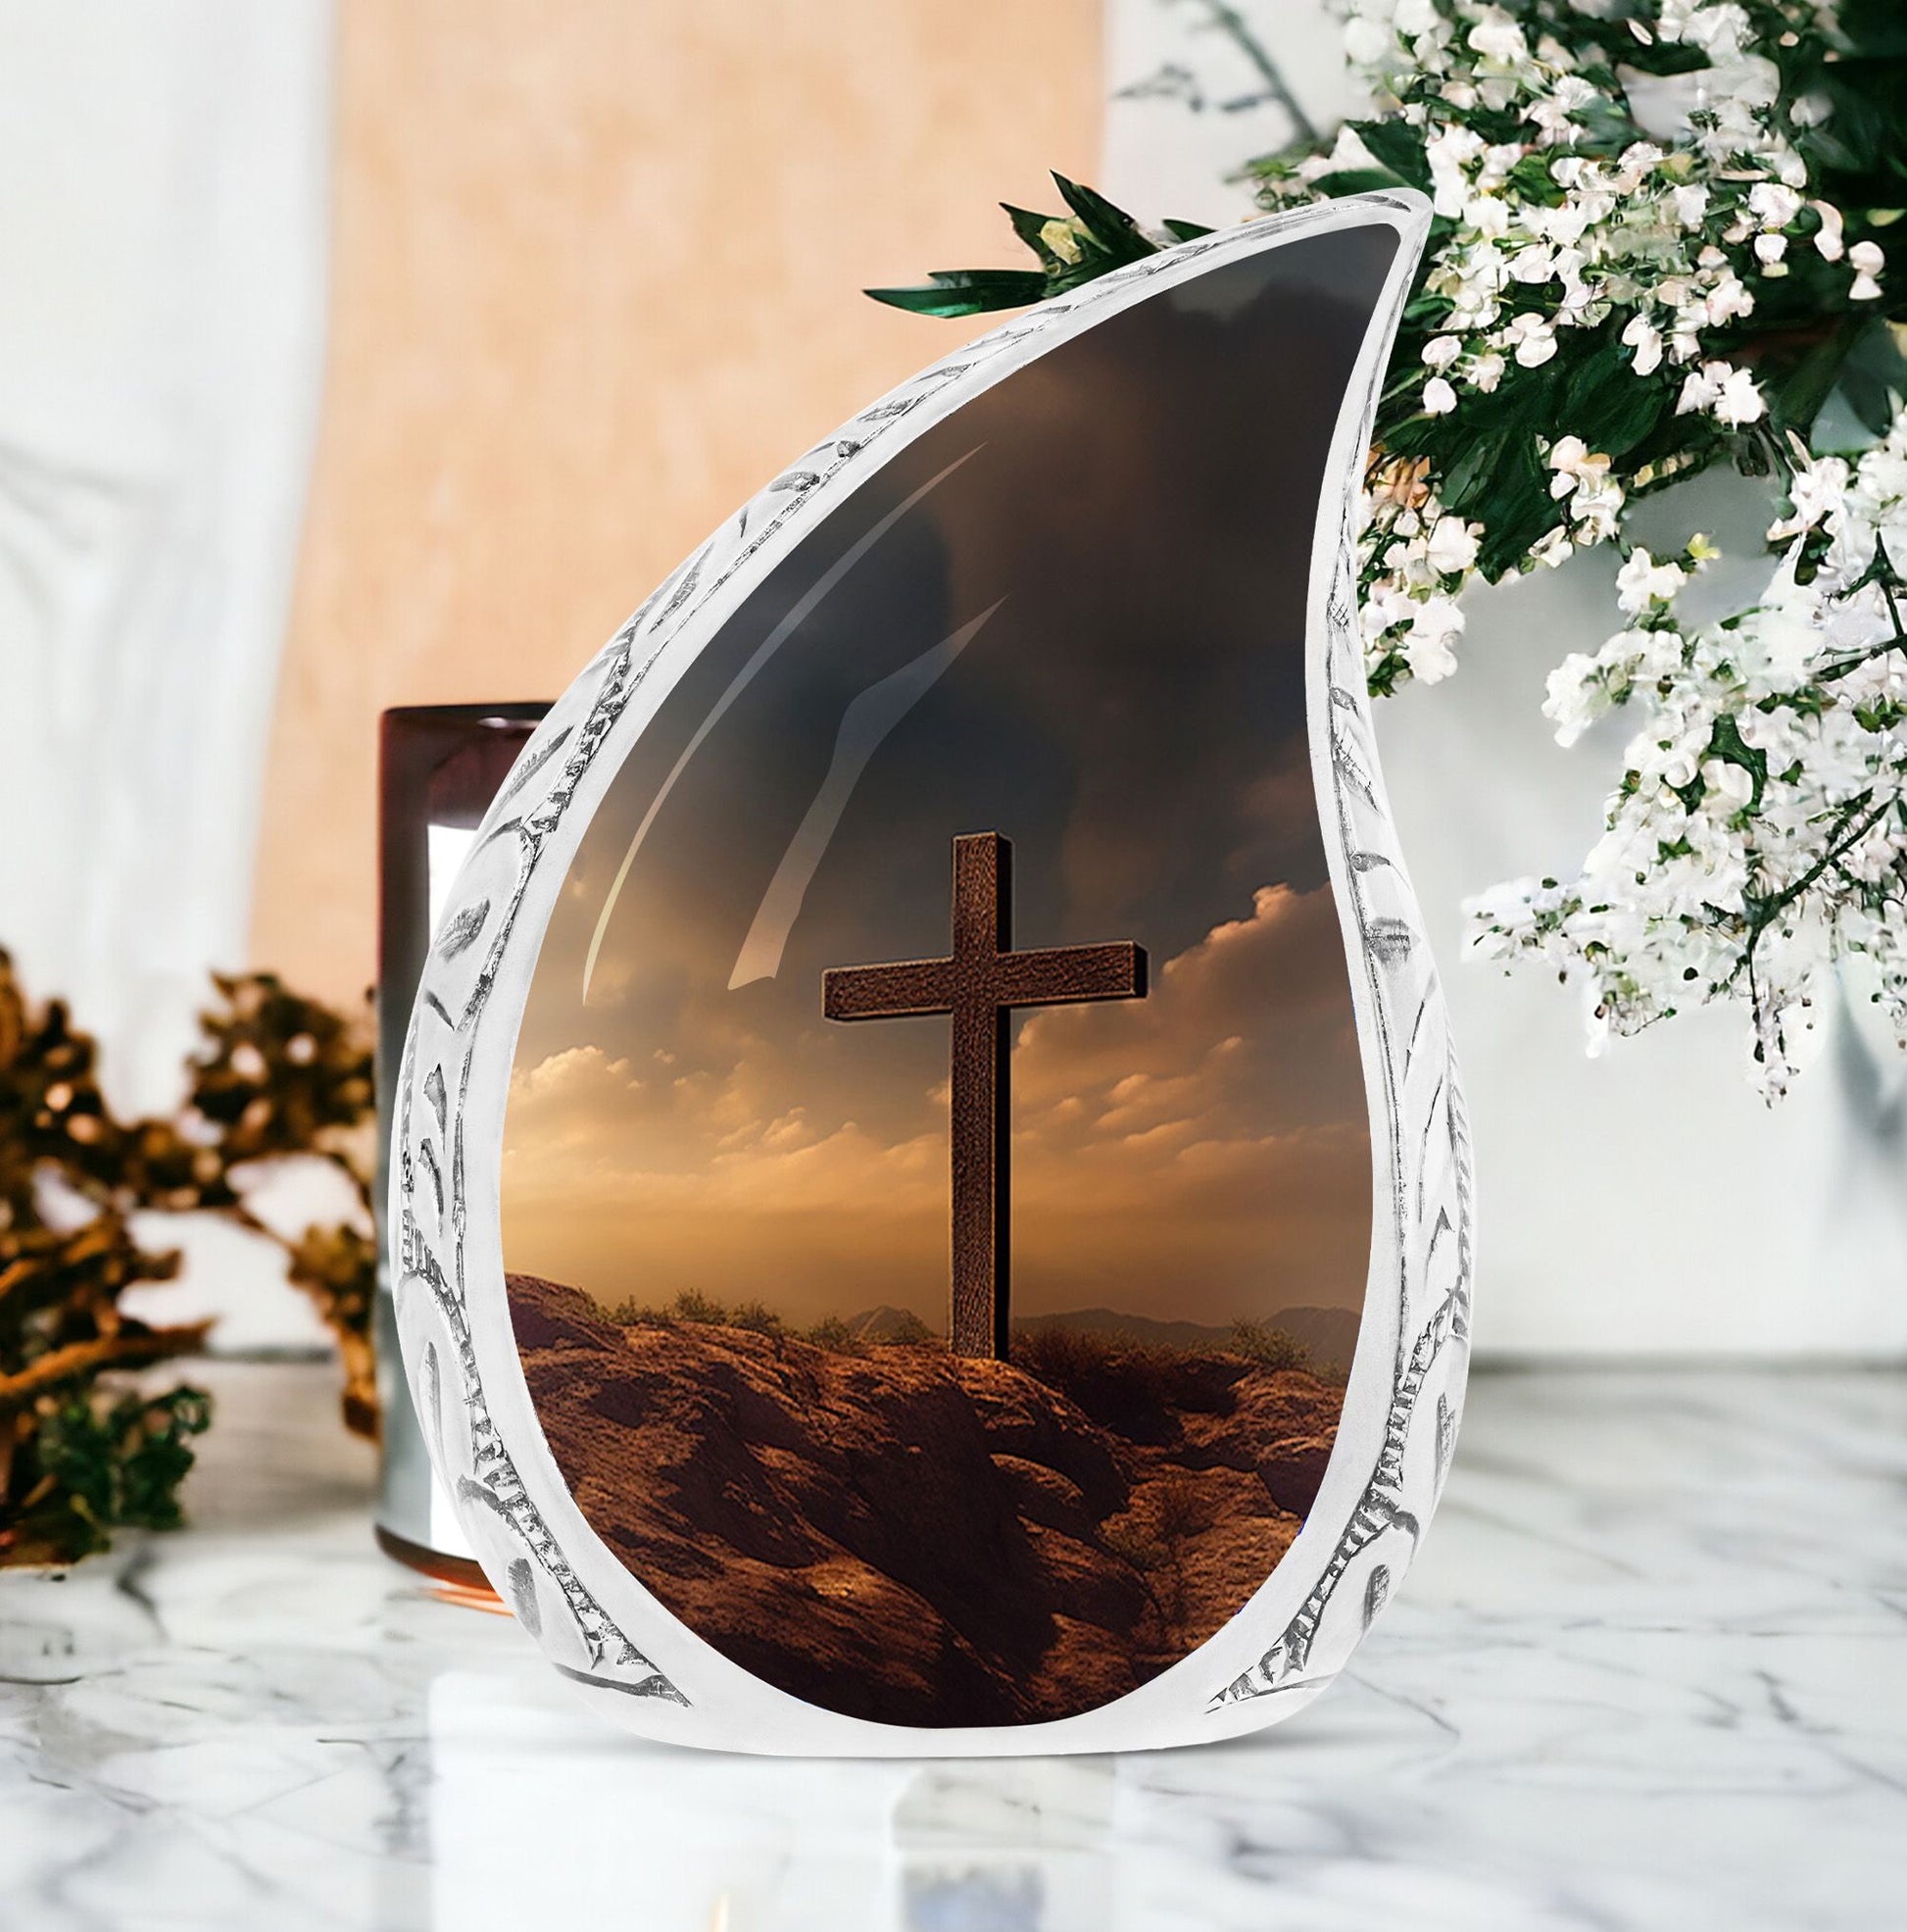 Large Christ themed urns for human ashes against a sunset sky, appropriate for funeral decorations.